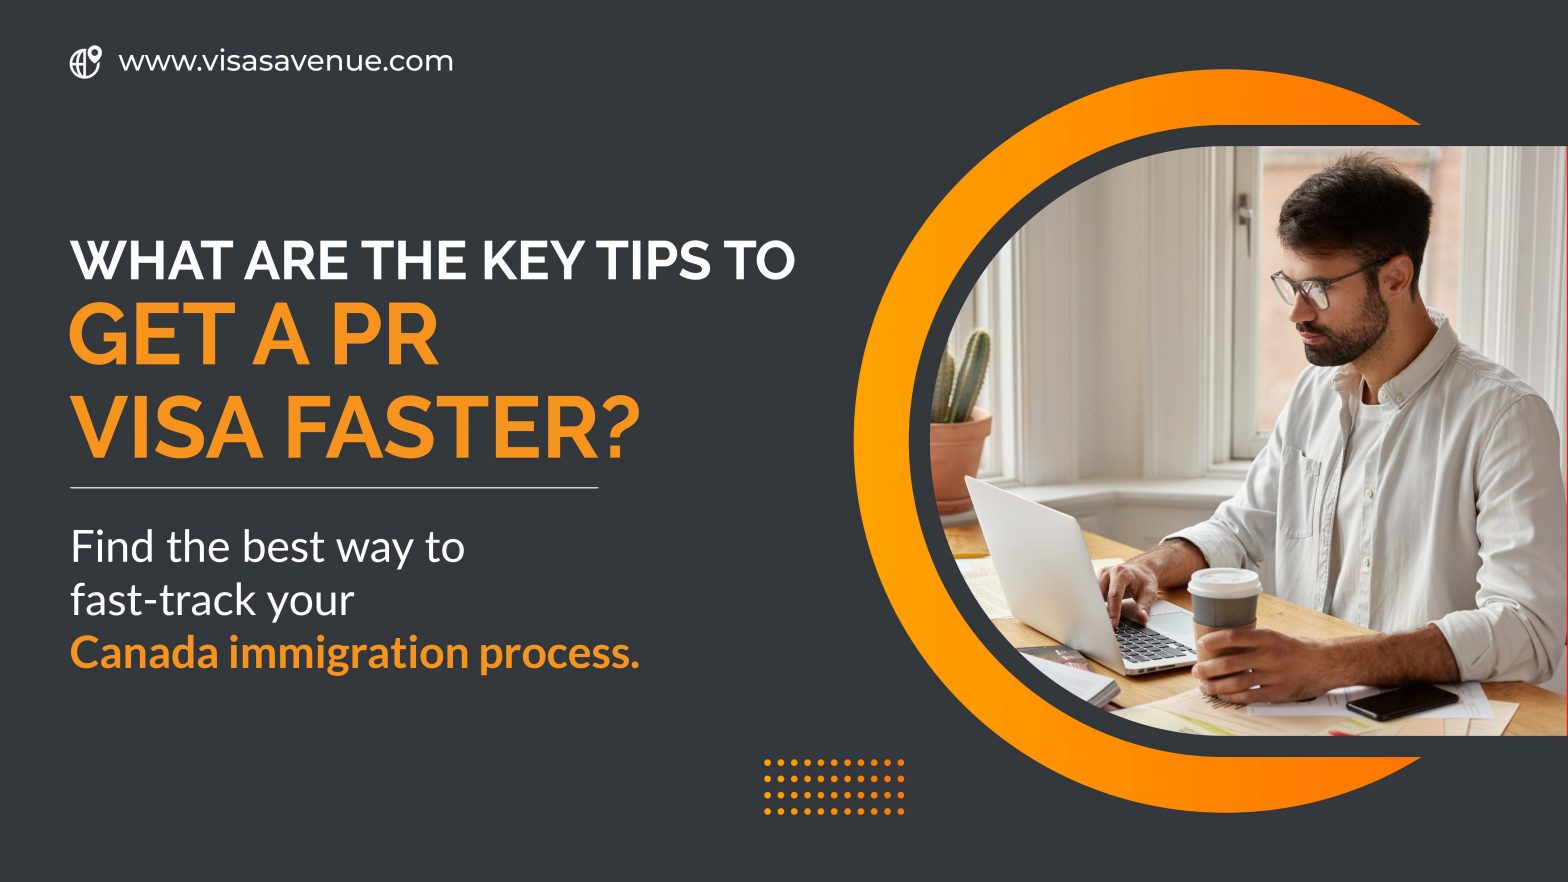 What are the Key Tips to Get PR Visa Faster?